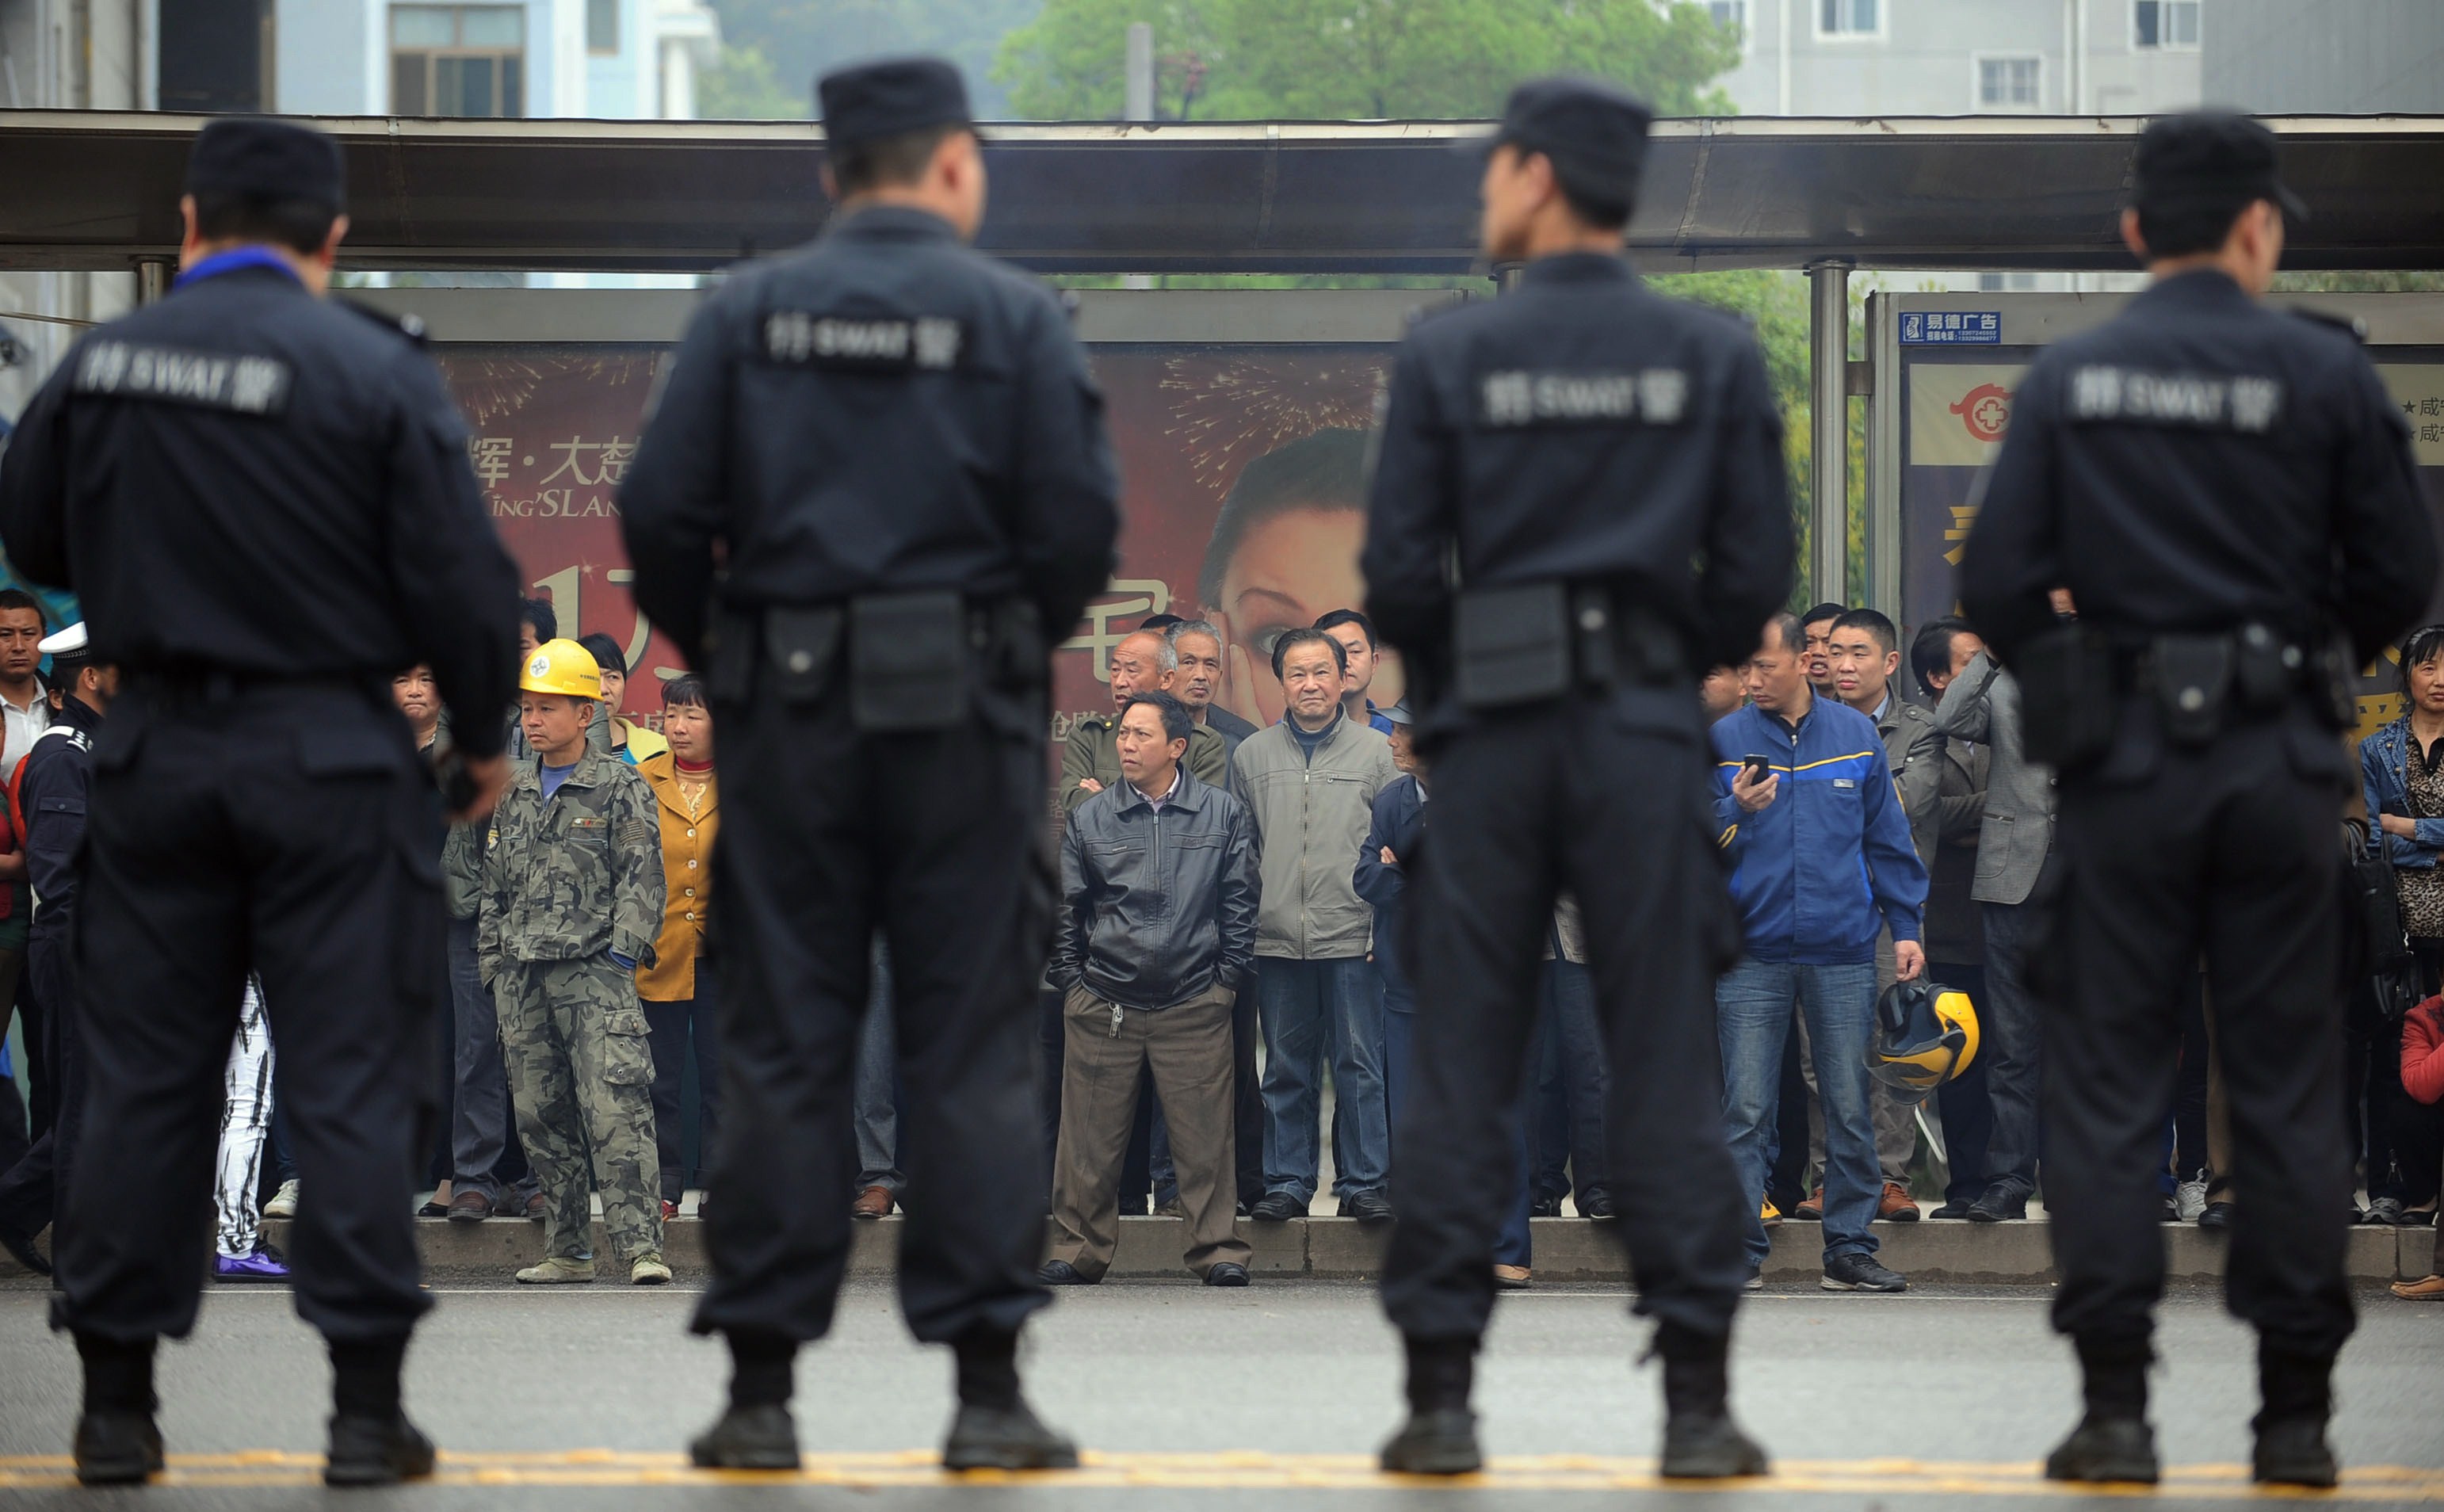 Citizens watch as police stand guard outside the Xianning Intermediate People's Court where Chinese mining tycoon Liu Han stands trial in Xianning, central China's Hubei province on March 31, 2014. (AFP&mdash;AFP/Getty Images)